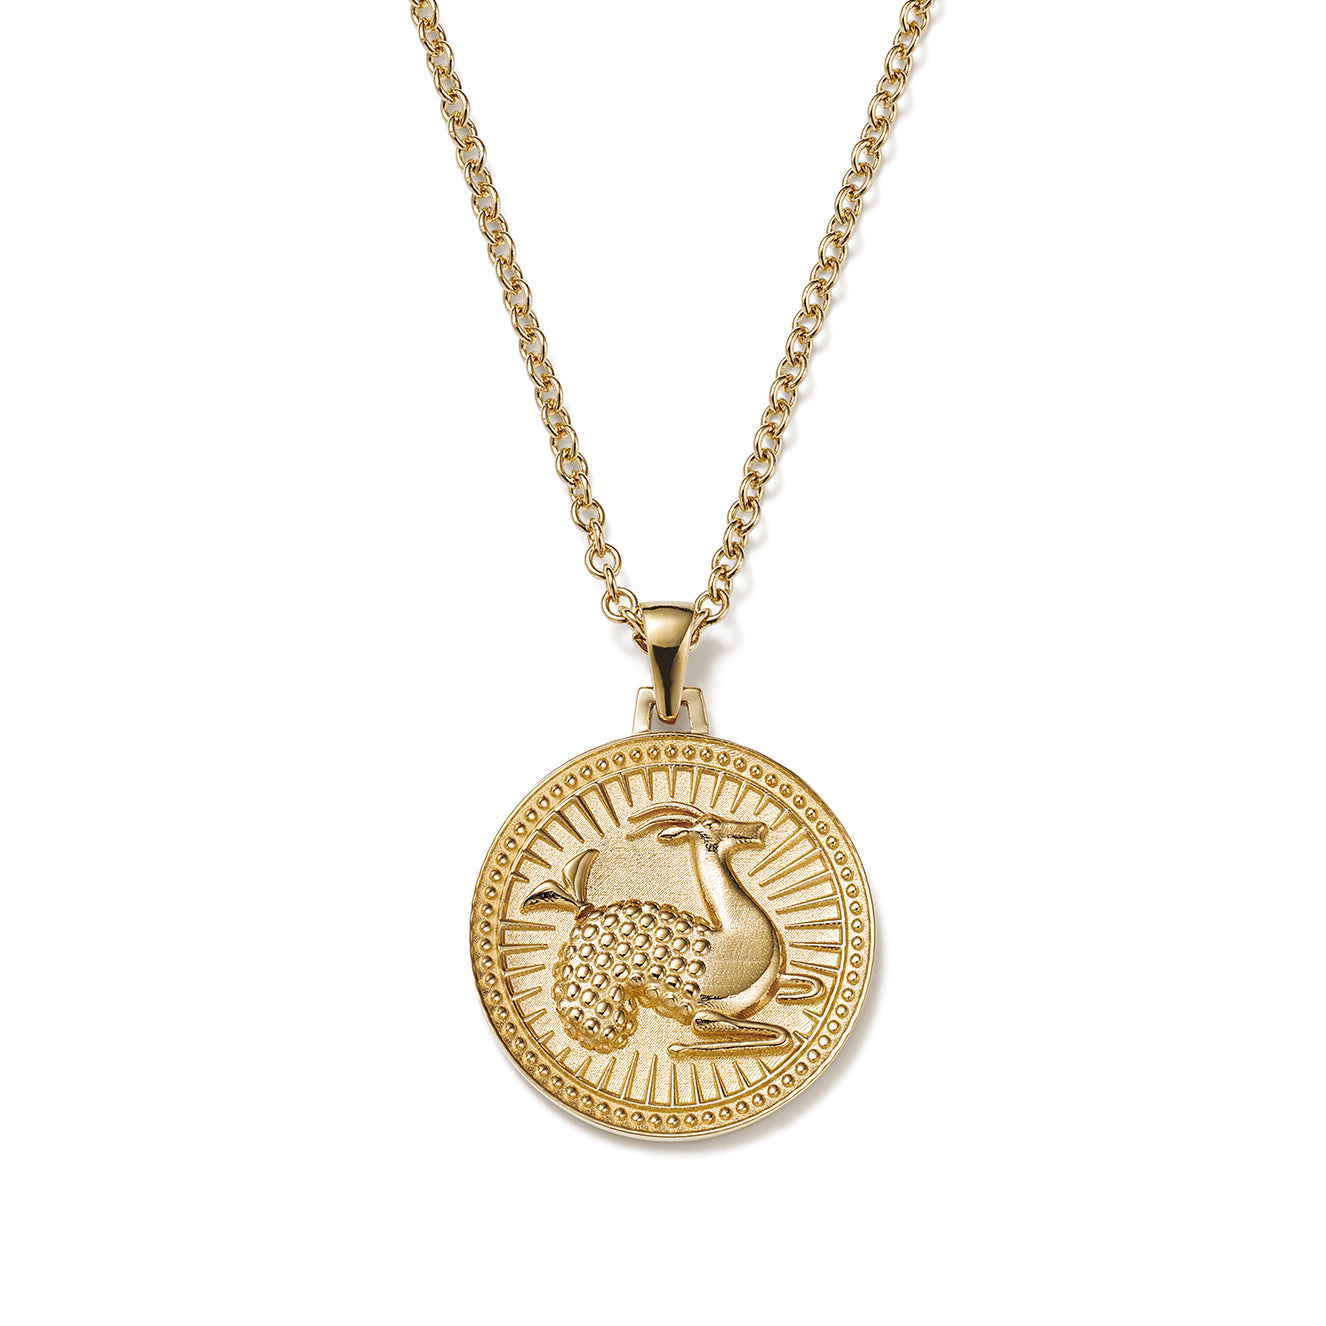 Ethical Gold Pendant with Capricorn Symbol on Gold Chain in Front of a White Background